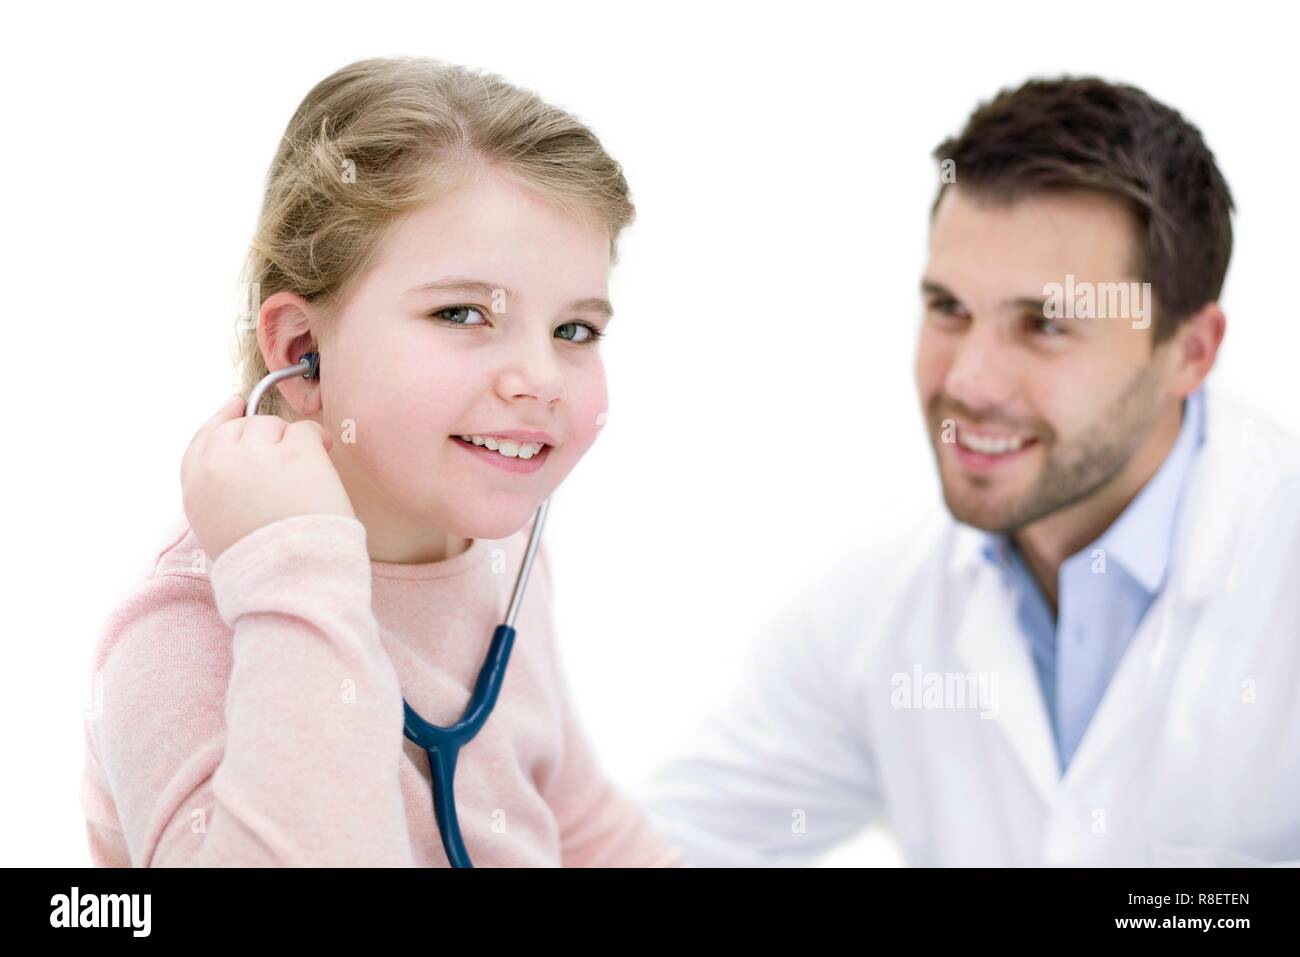 Girl role playing doctor with stethoscope. Stock Photo